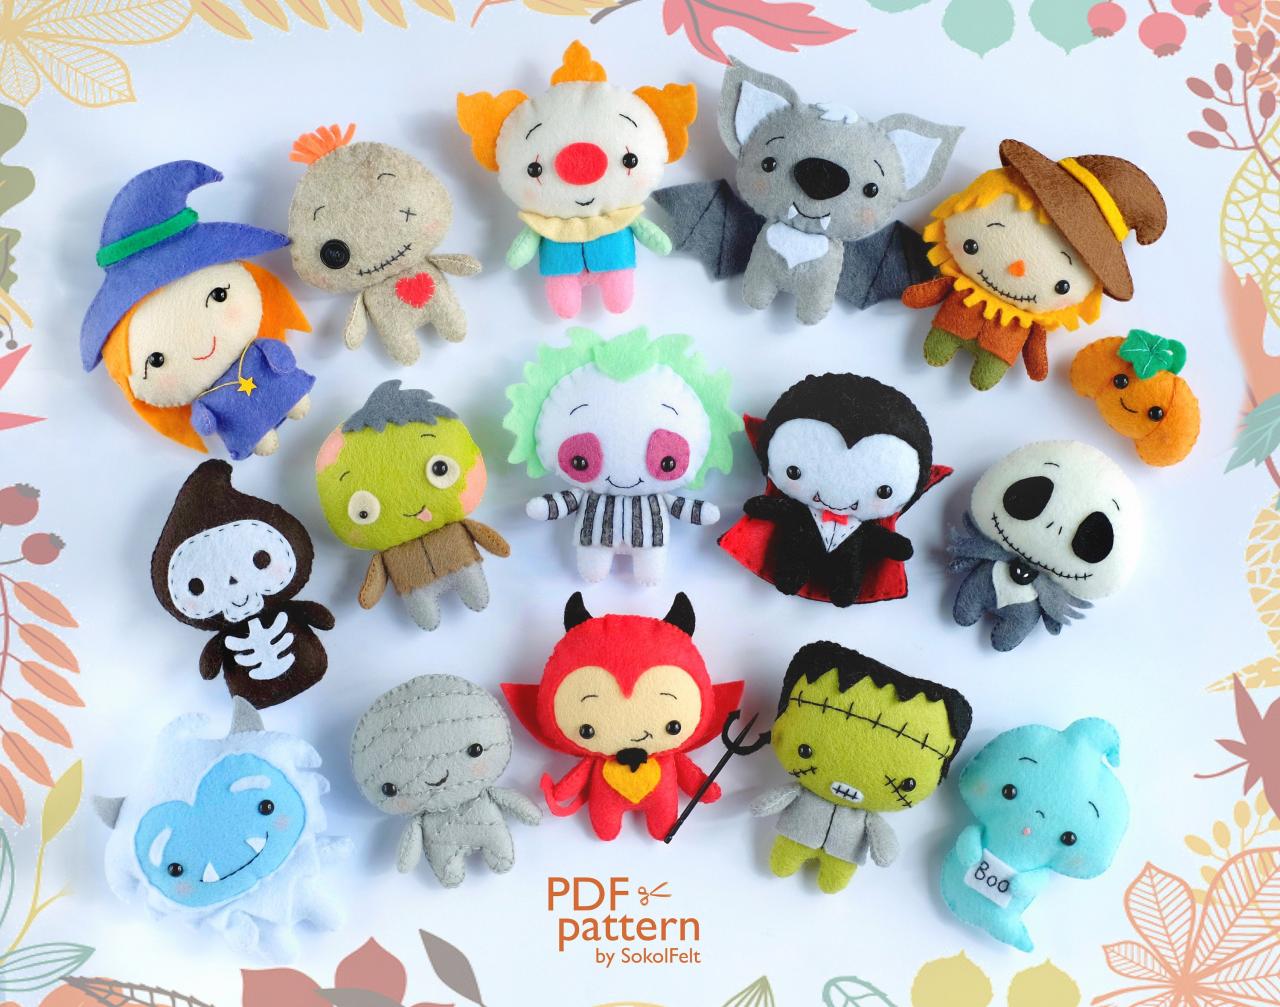 Set of 15 Felt Halloween toy sewing PDF and SVG Patterns, Easy to make ornaments, Vampire, Devil, Beetlejuice, Ghost, Zombie, Scarecrow.